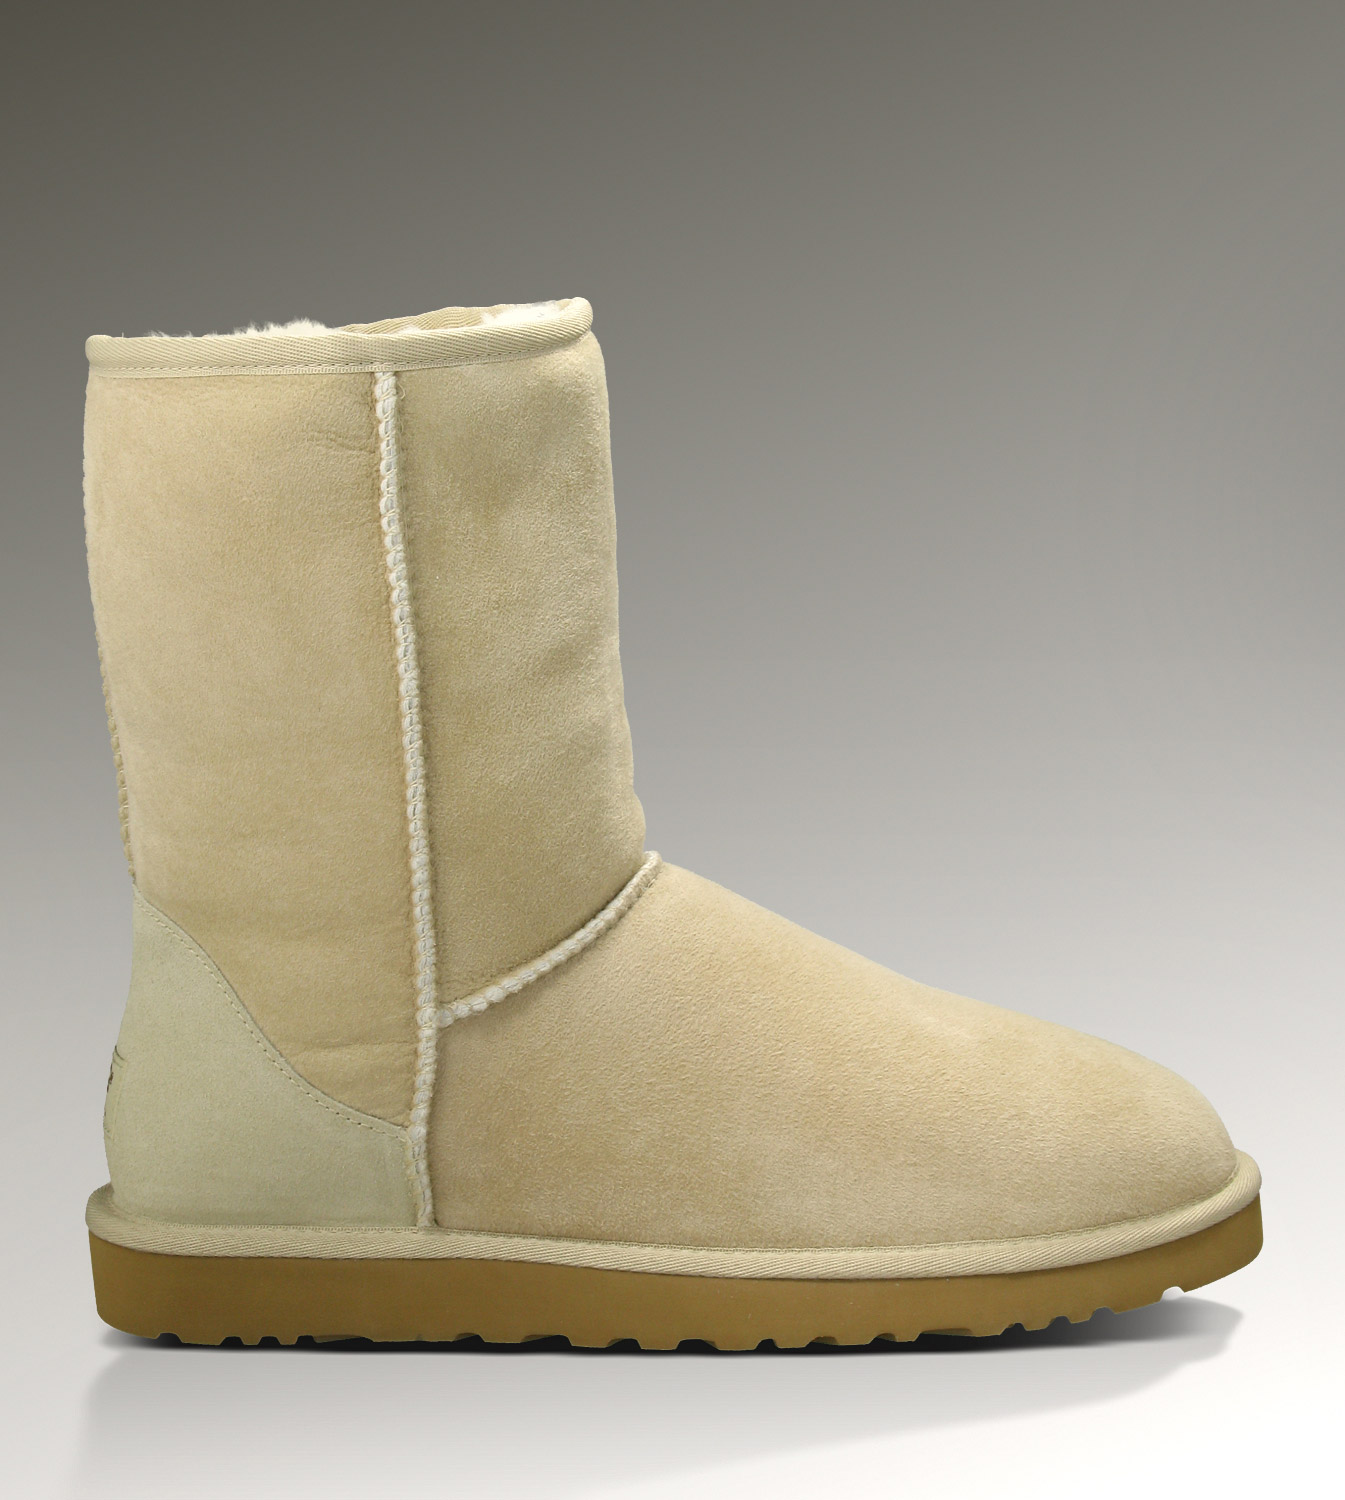 Ugg Outlet Classic Short Sand Boots 586170